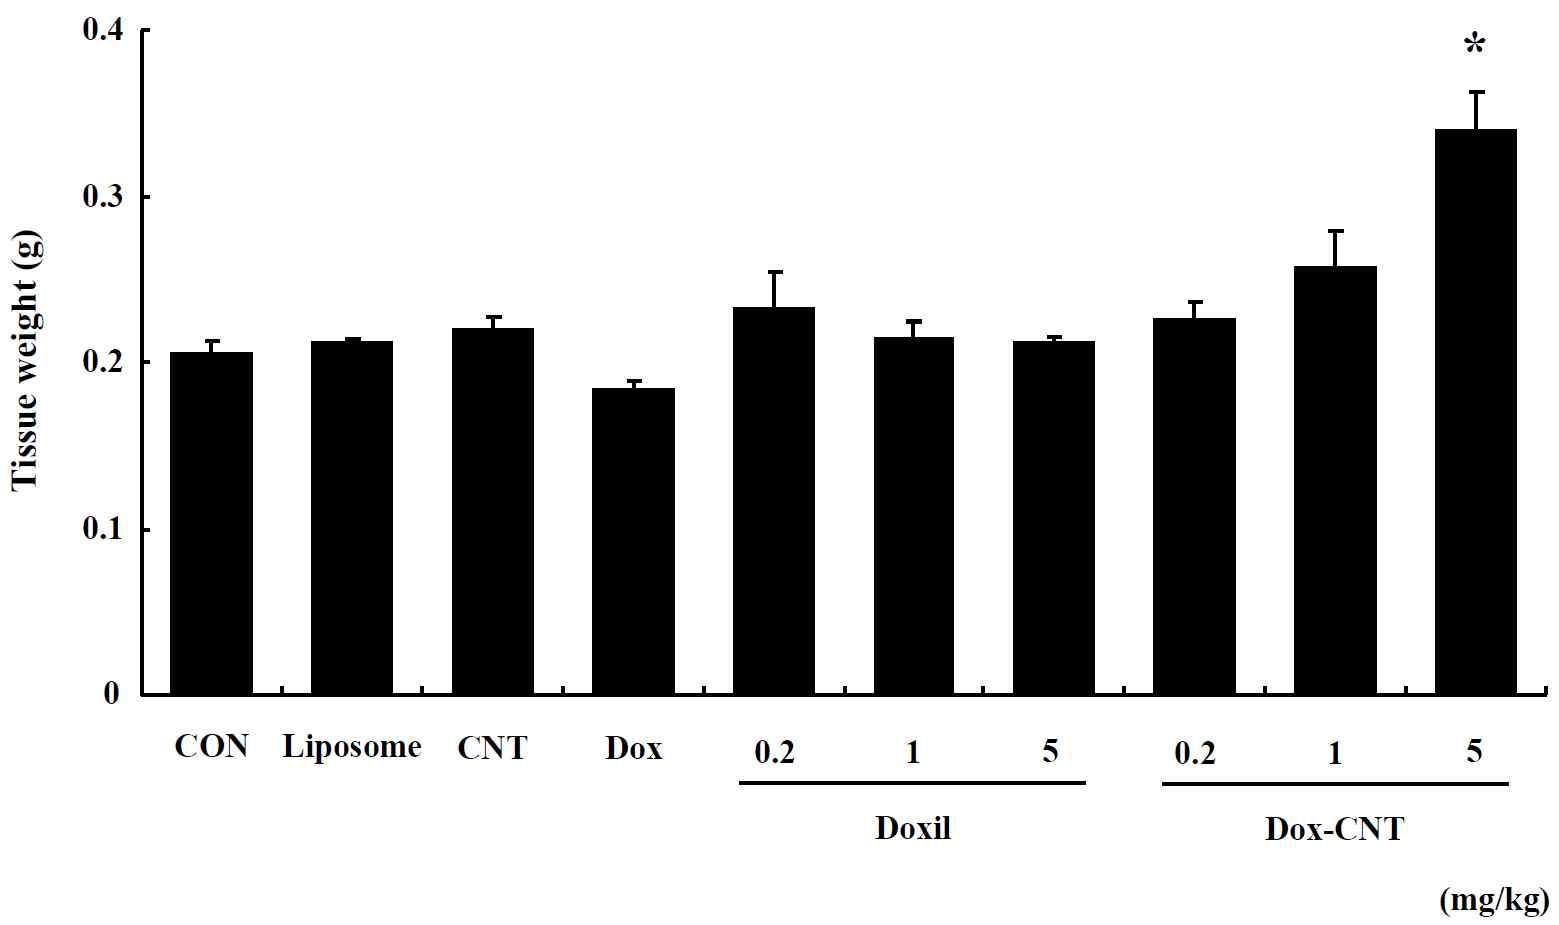 The change of Lung weight in male ICR mice of repeated exposure for 14 days. Mice were respectively administered by intravenous injection with liposome, CNT, Dox, Doxil (0.2, 1, 5 mg/kg) and Dox-CNT (0.2, 1, 5 mg/kg). The results are presented as mean ± SE (n = 10). * p < 0.05, significantly different from the control.